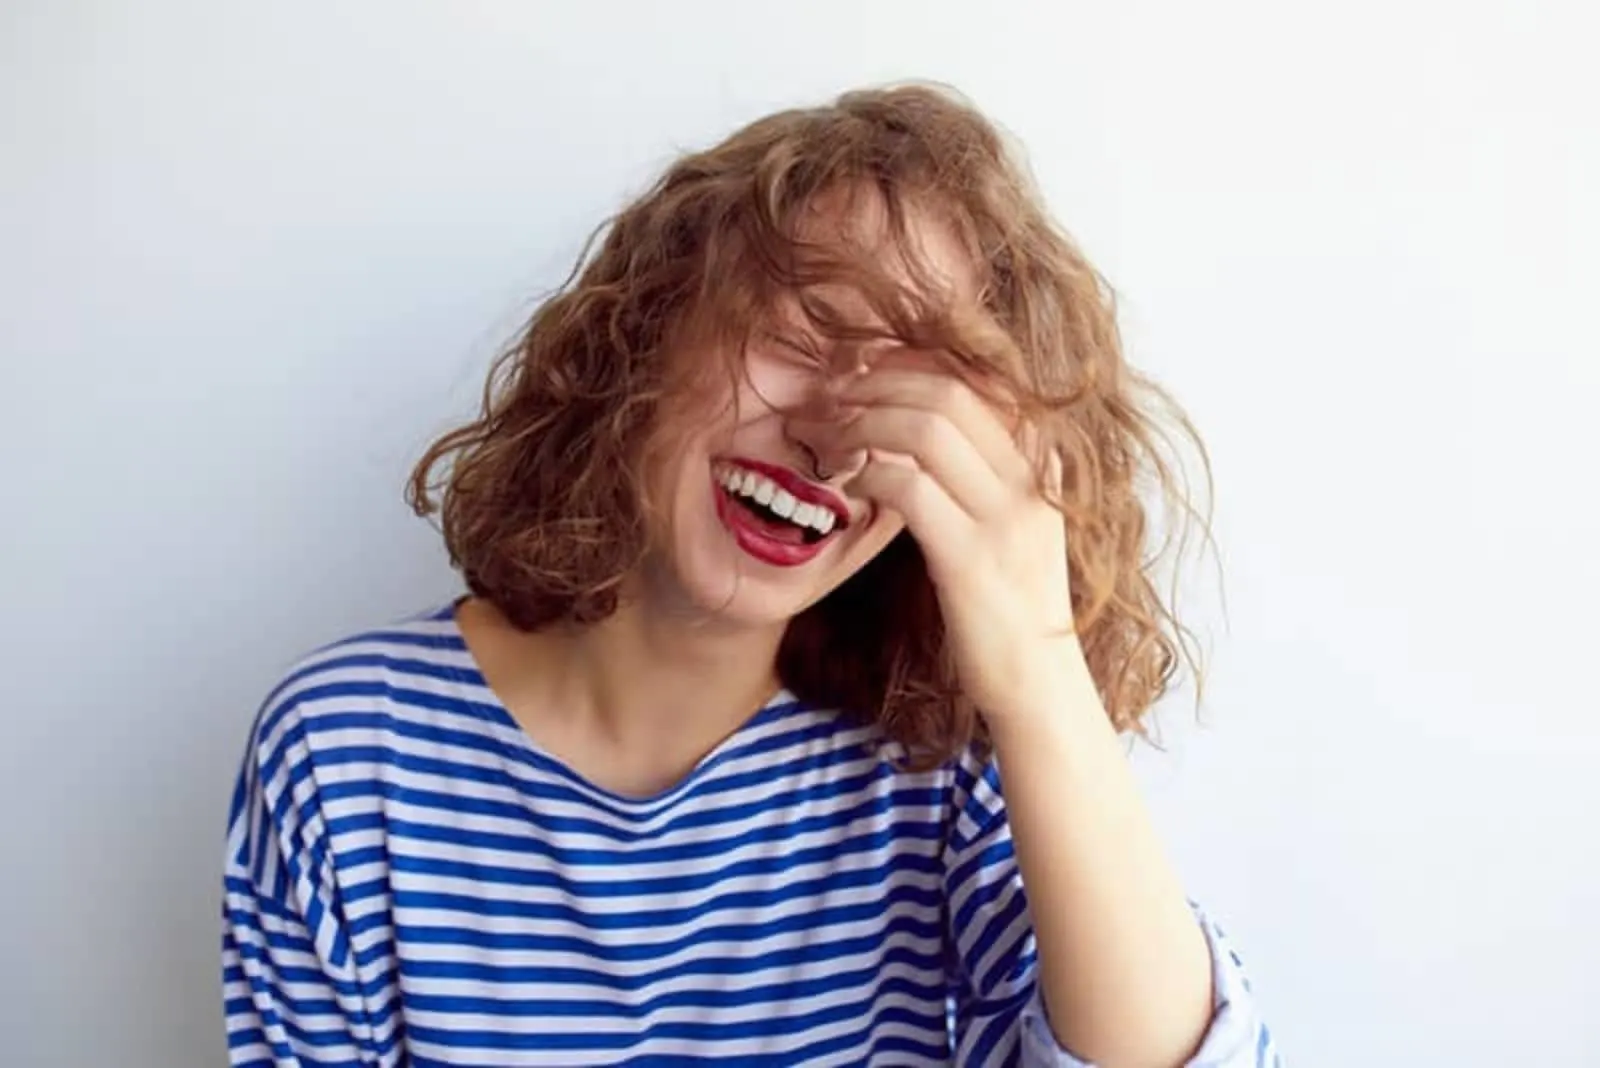 a woman with shorter brown hair laughs